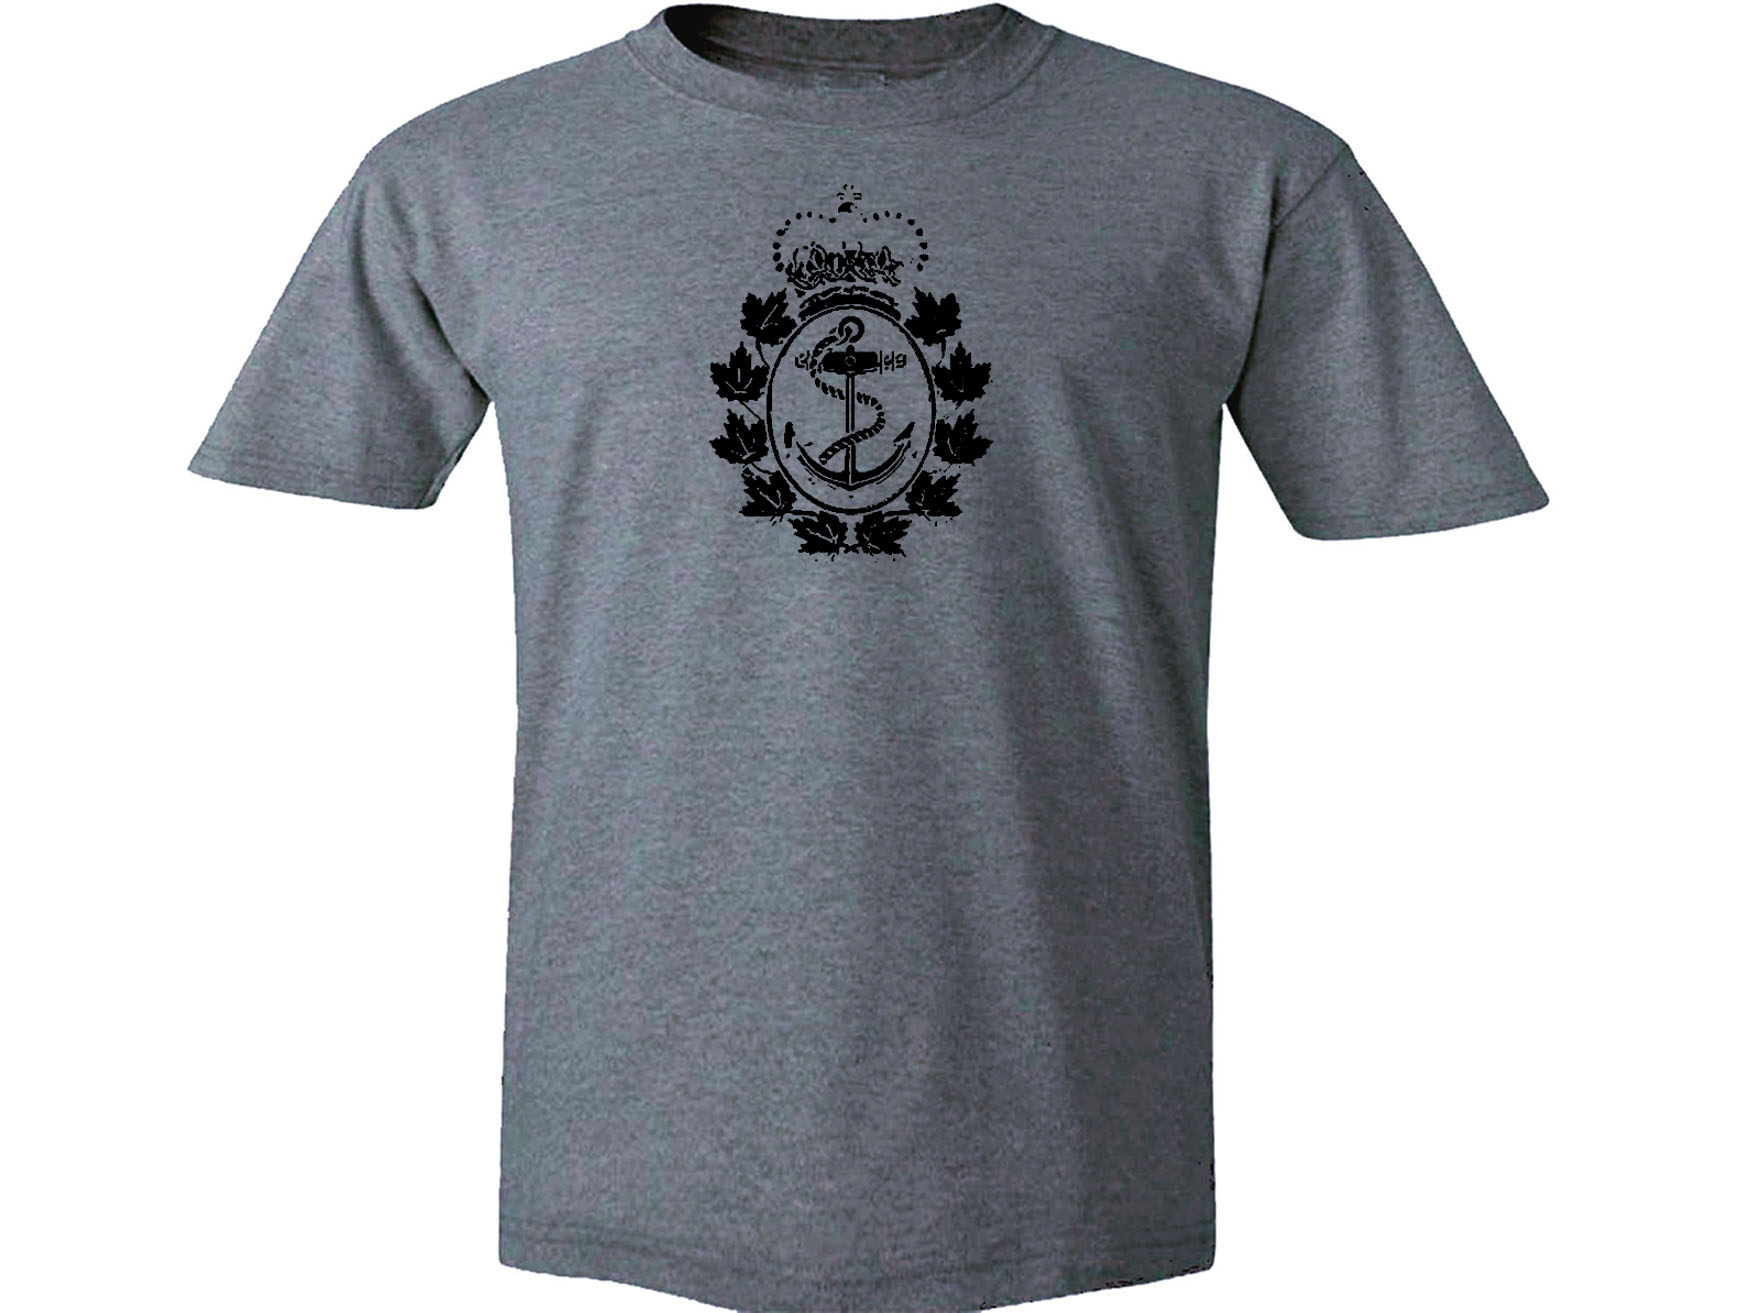 Canadian navy forces emblem army gray t-shirt